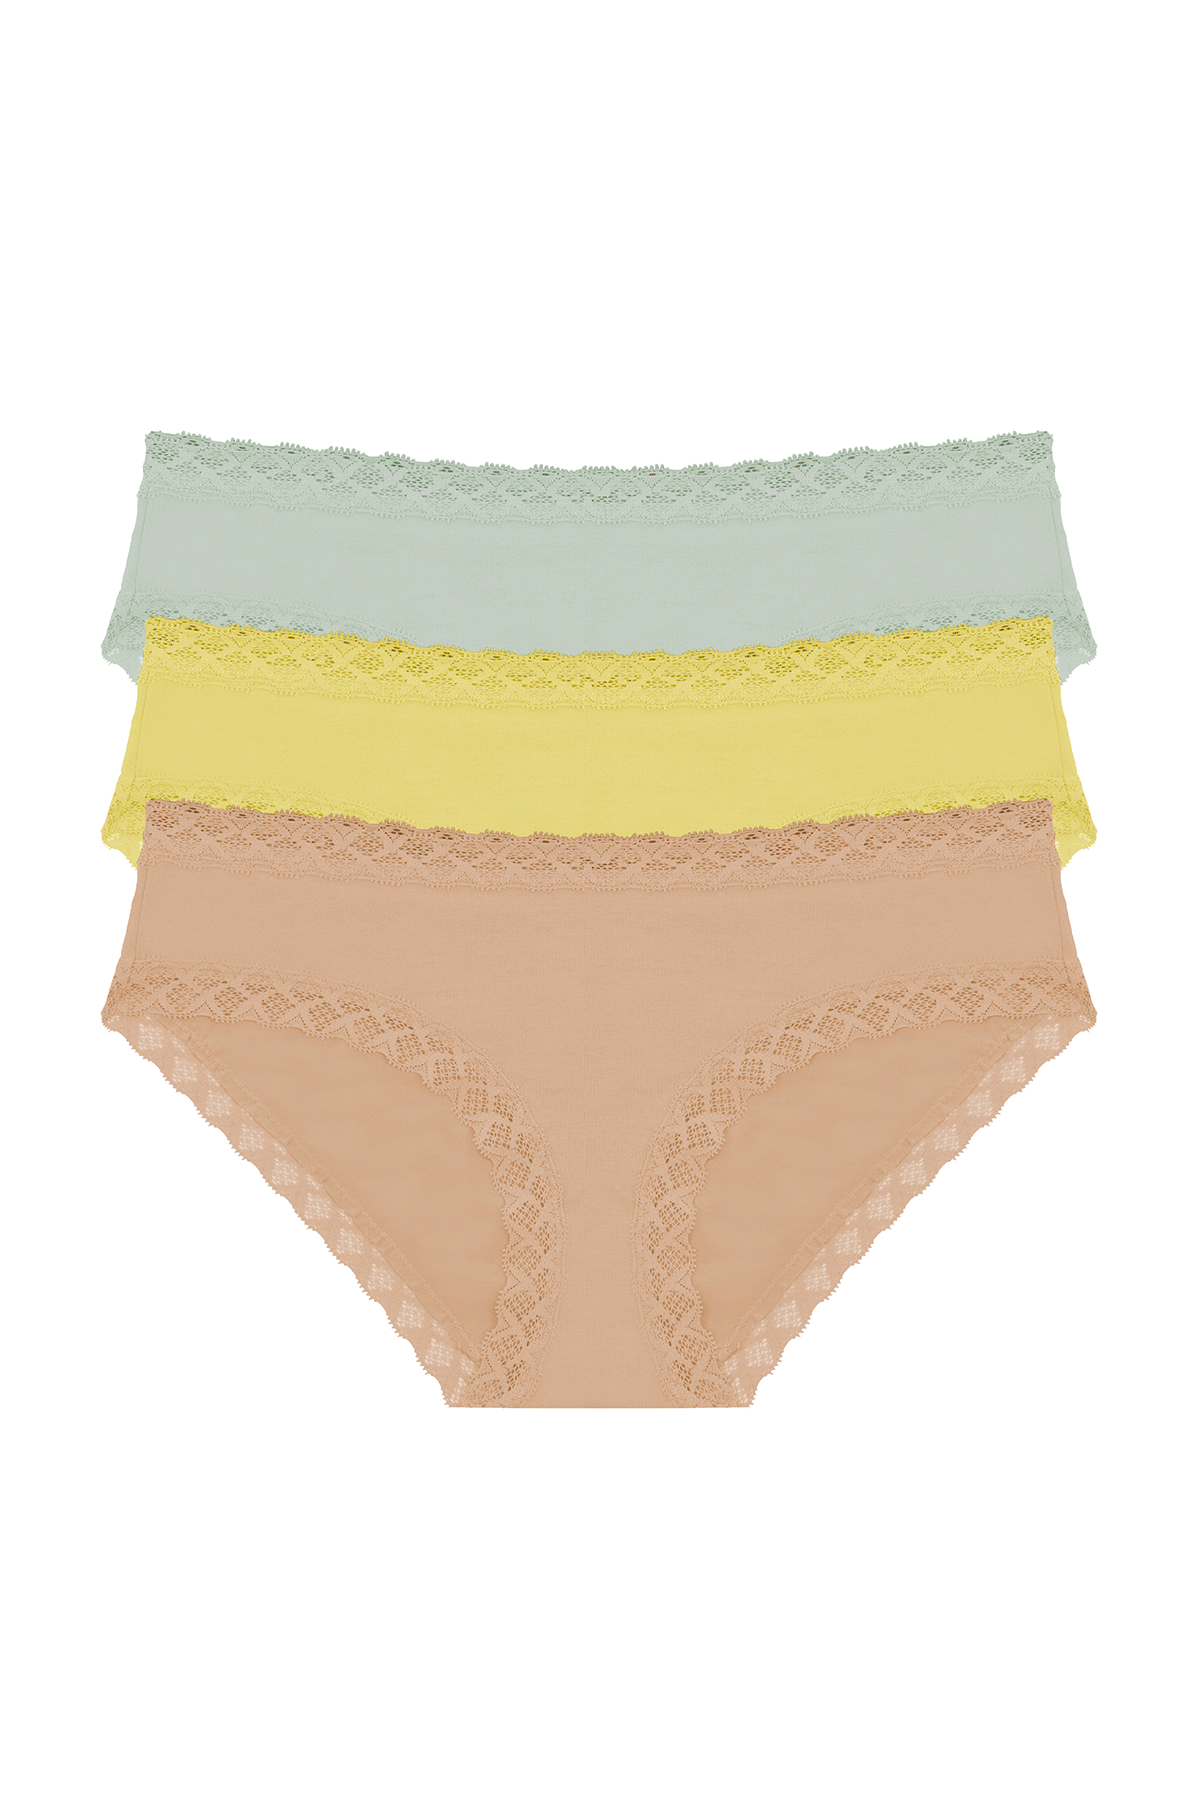 Bliss French Cut Brief 3 Pack - Cafe